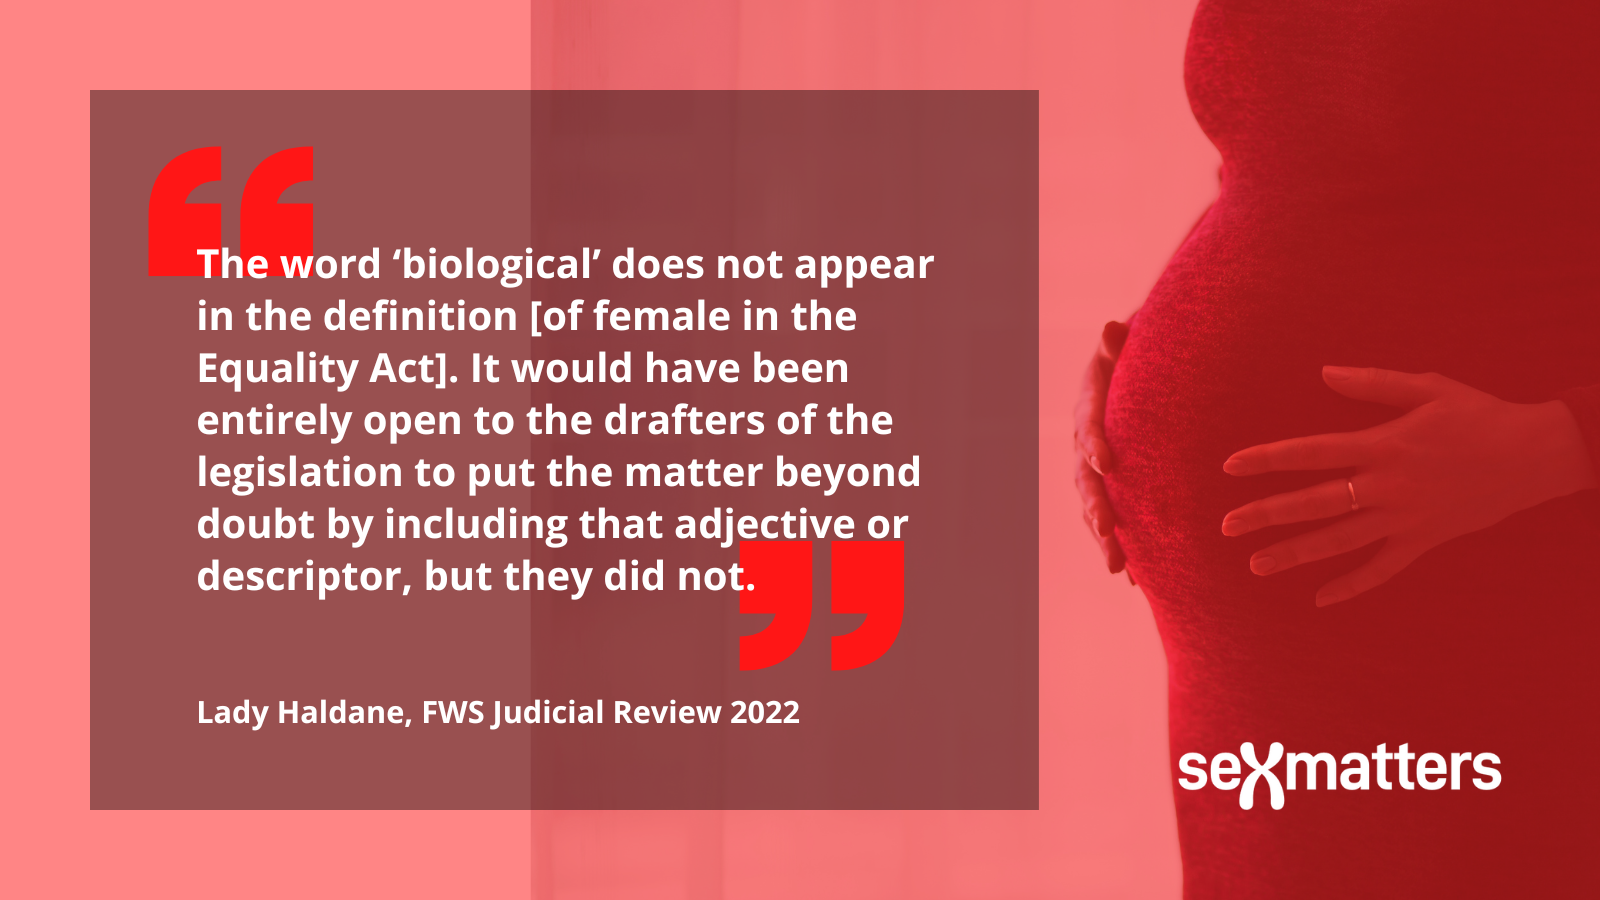 The word ‘biological’ does not appear in the definition [of female in the Equality Act]. It would have been entirely open to the drafters of the legislation to put the matter beyond doubt by including that adjective or descriptor, but they did not. Lady Haldane, FWS Judicial Review 2022